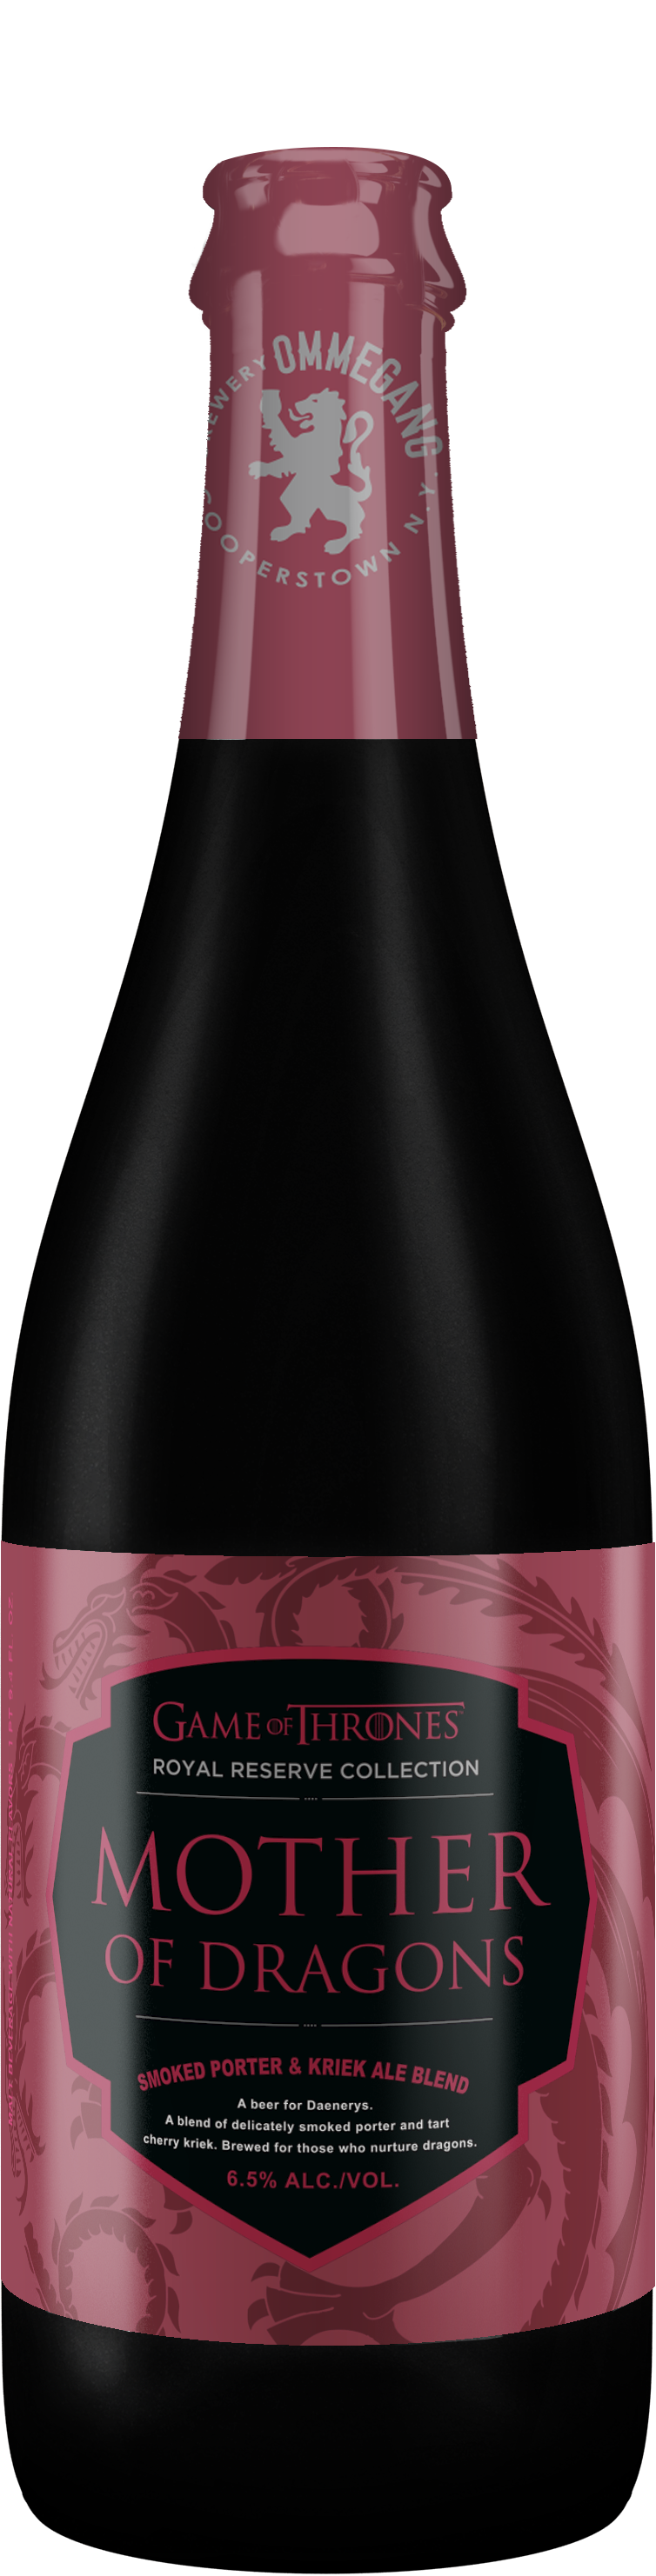 Ommegang Game of Thrones Mother of Dragons 750ML